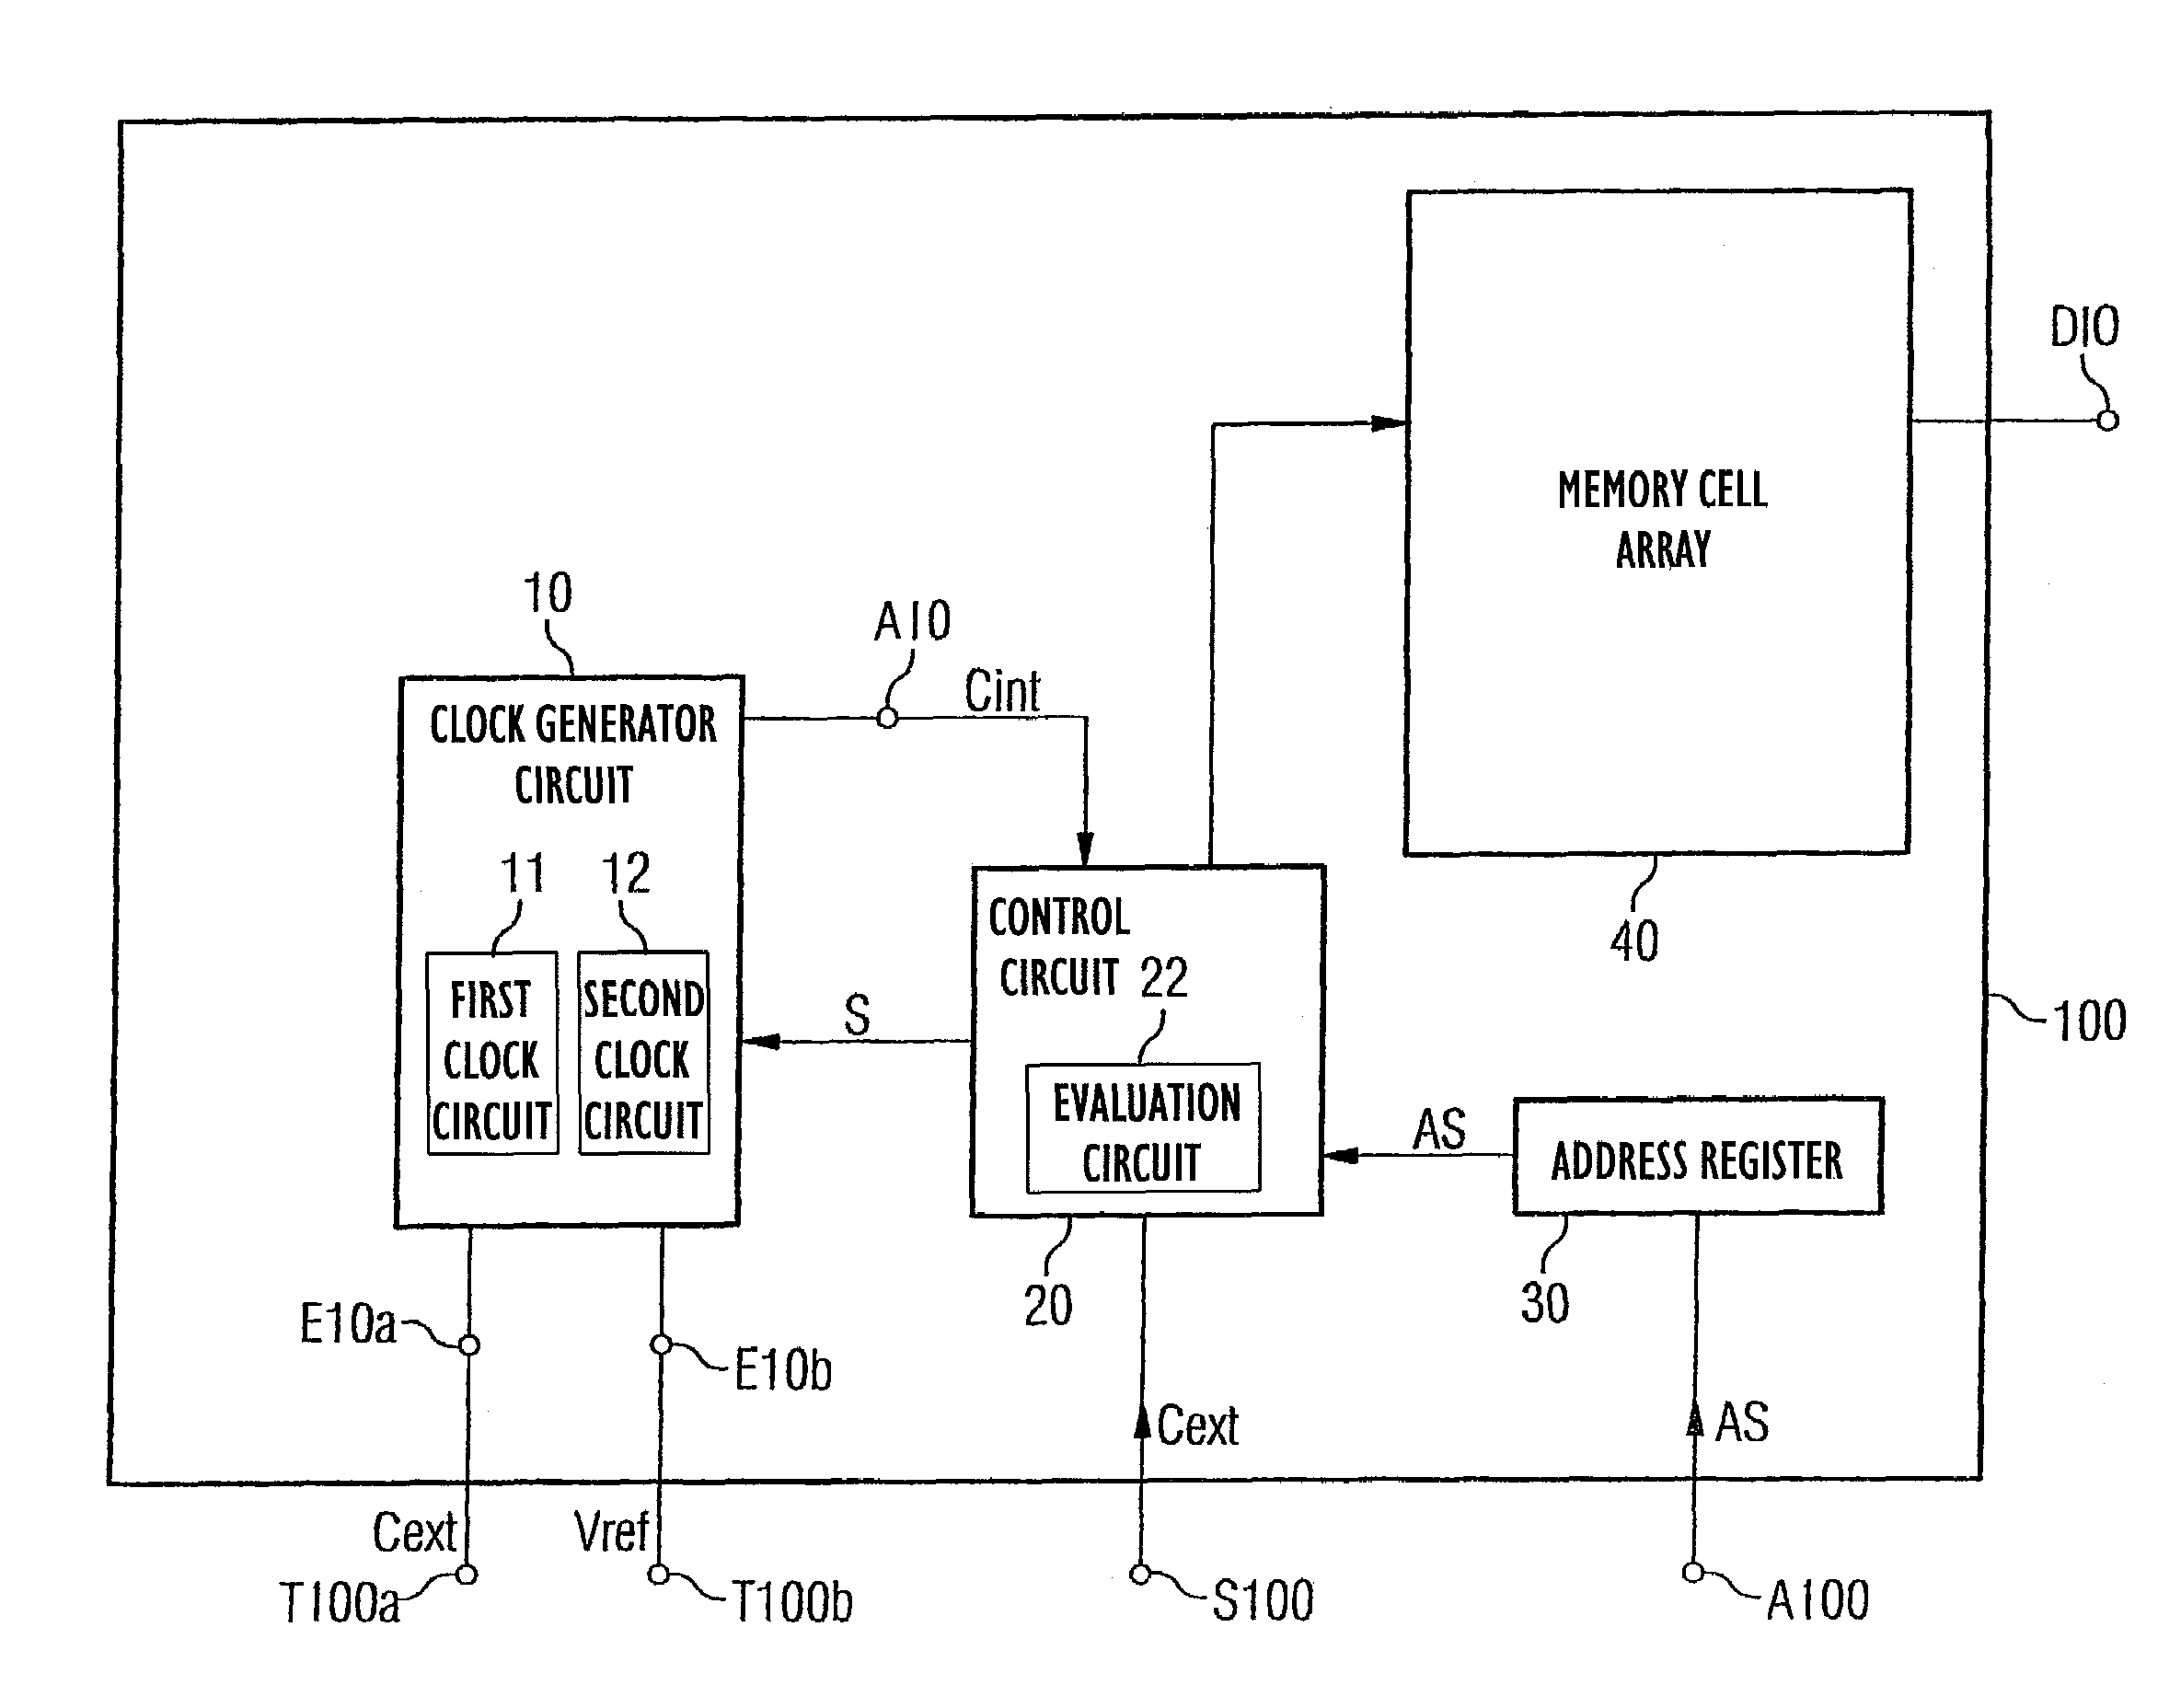 Integrated semiconductor memory with clock generation